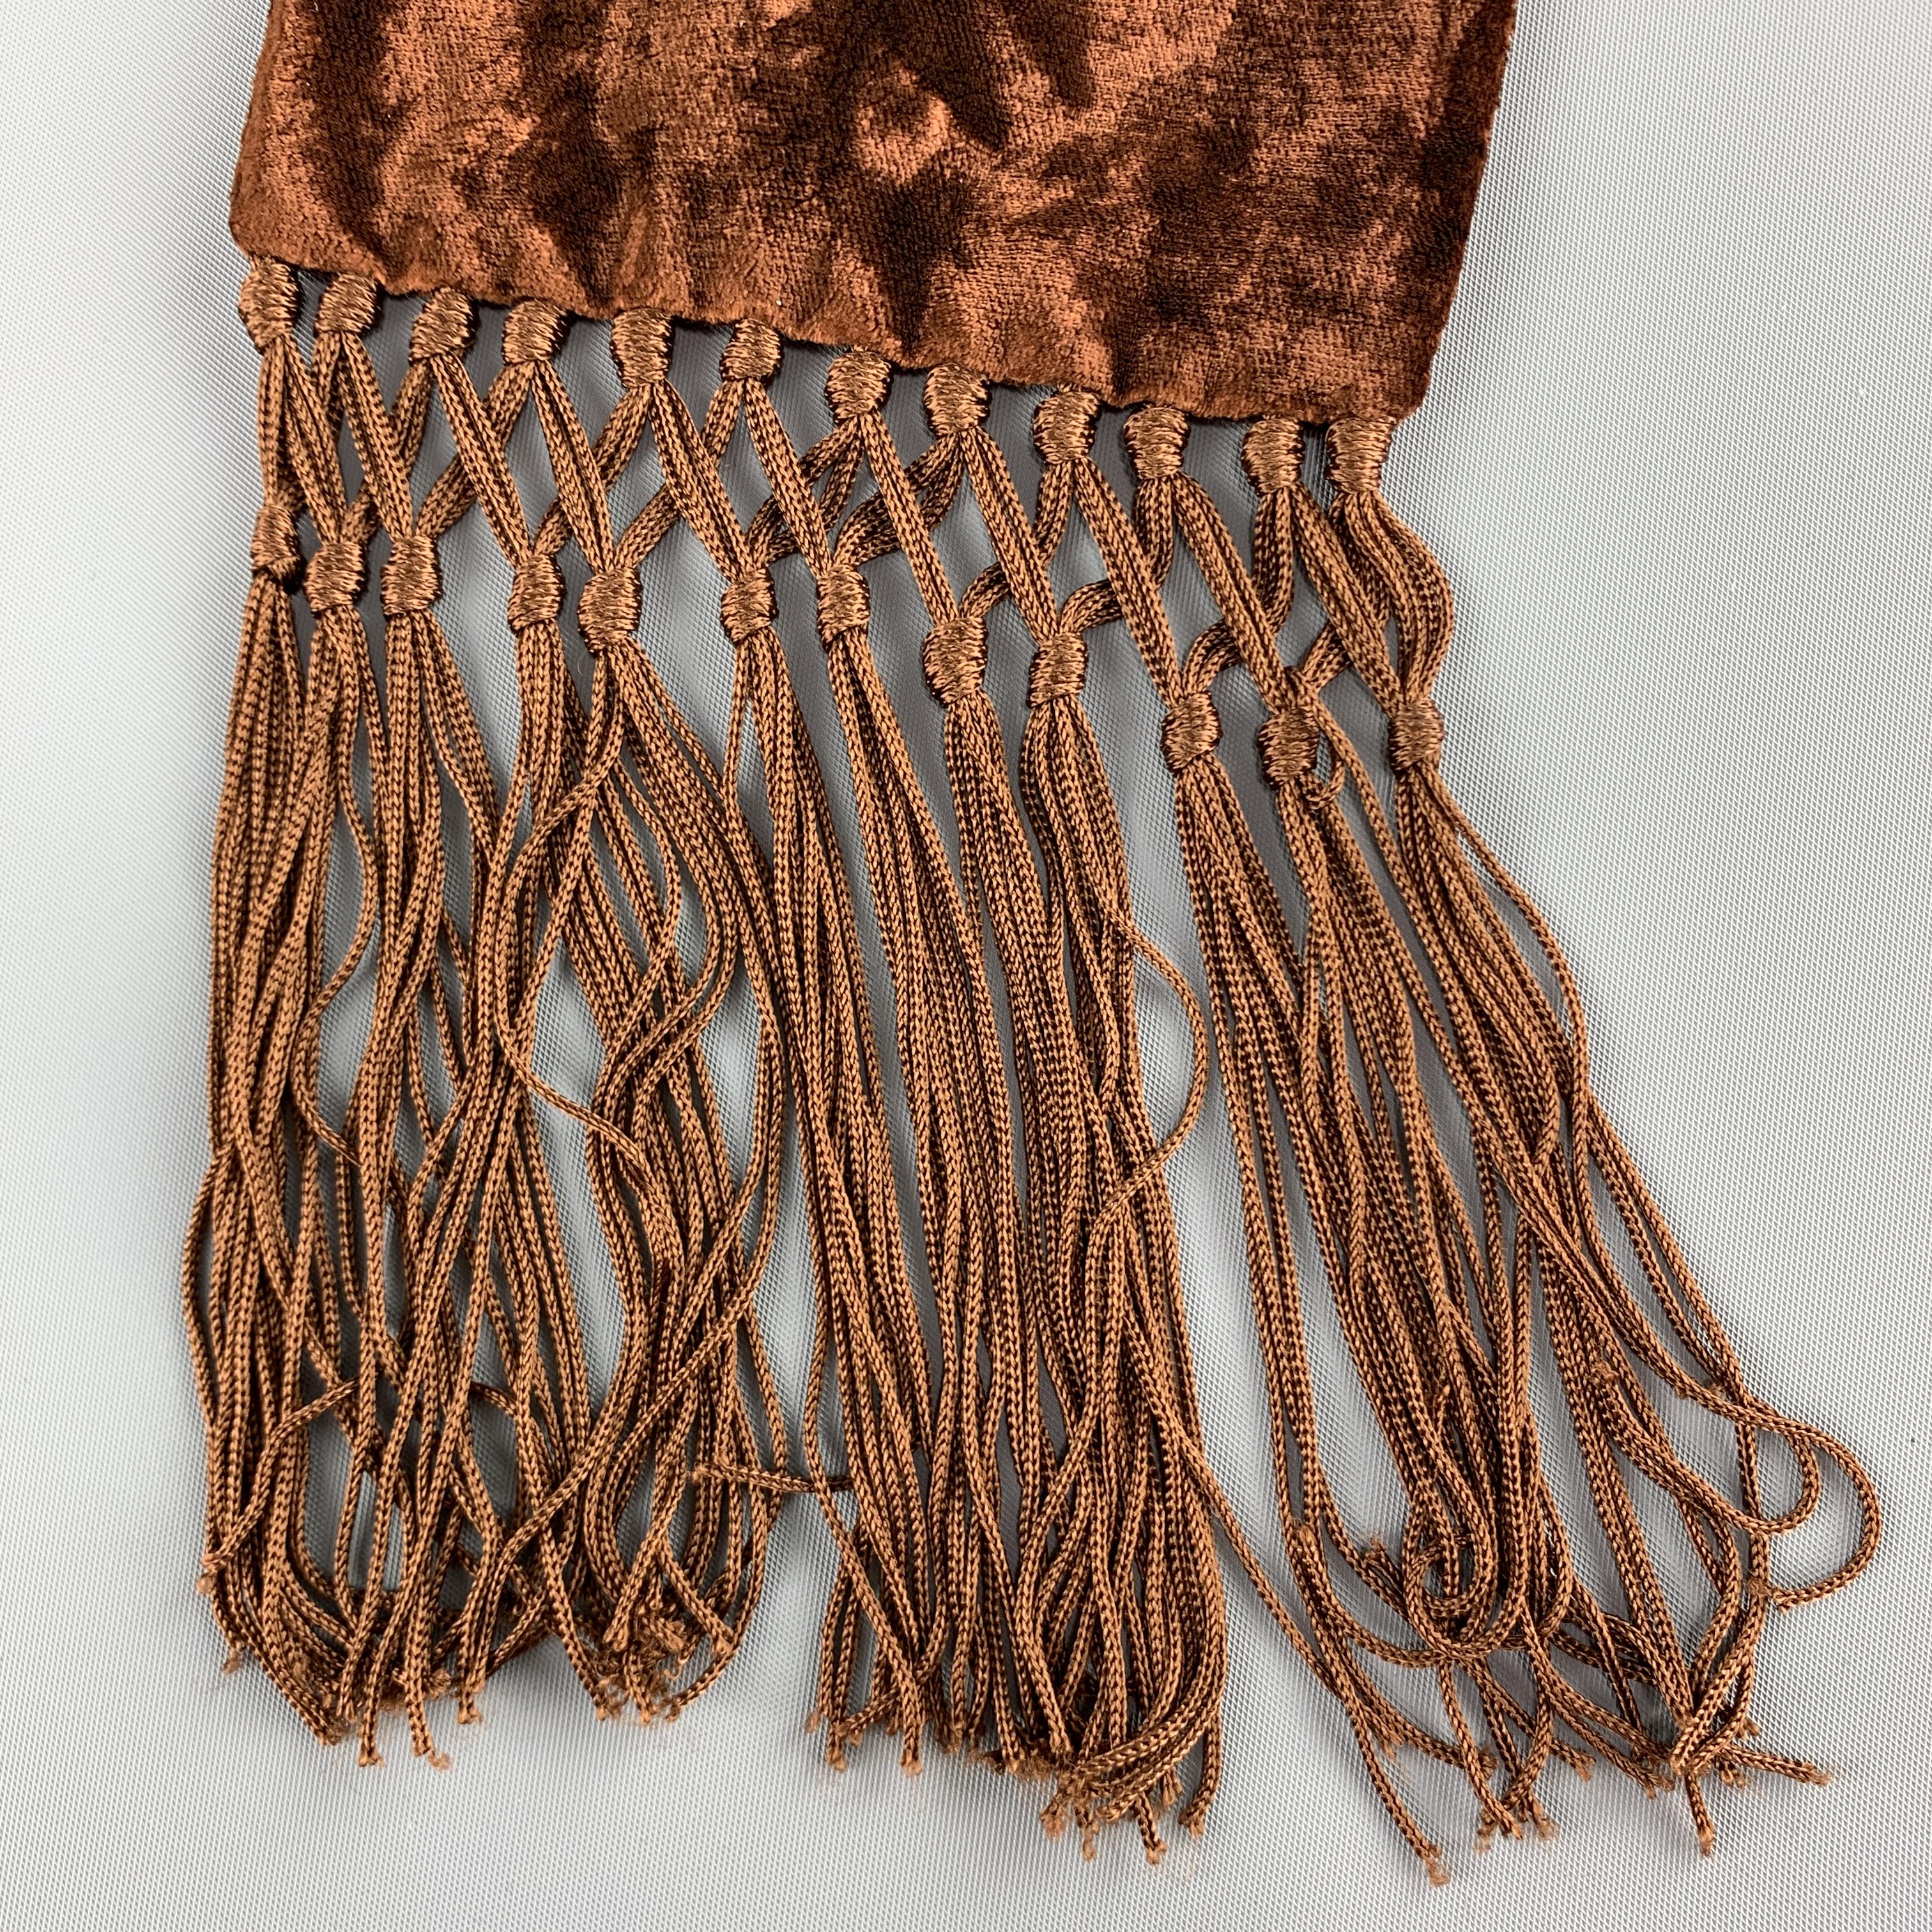 GUCCI by TOM FORD neck scarf comes in copper brown crushed velvet with six inch woven fringe trim. Made in Italy.

Excellent Pre-Owned Condition.

63 x 4.75 in.